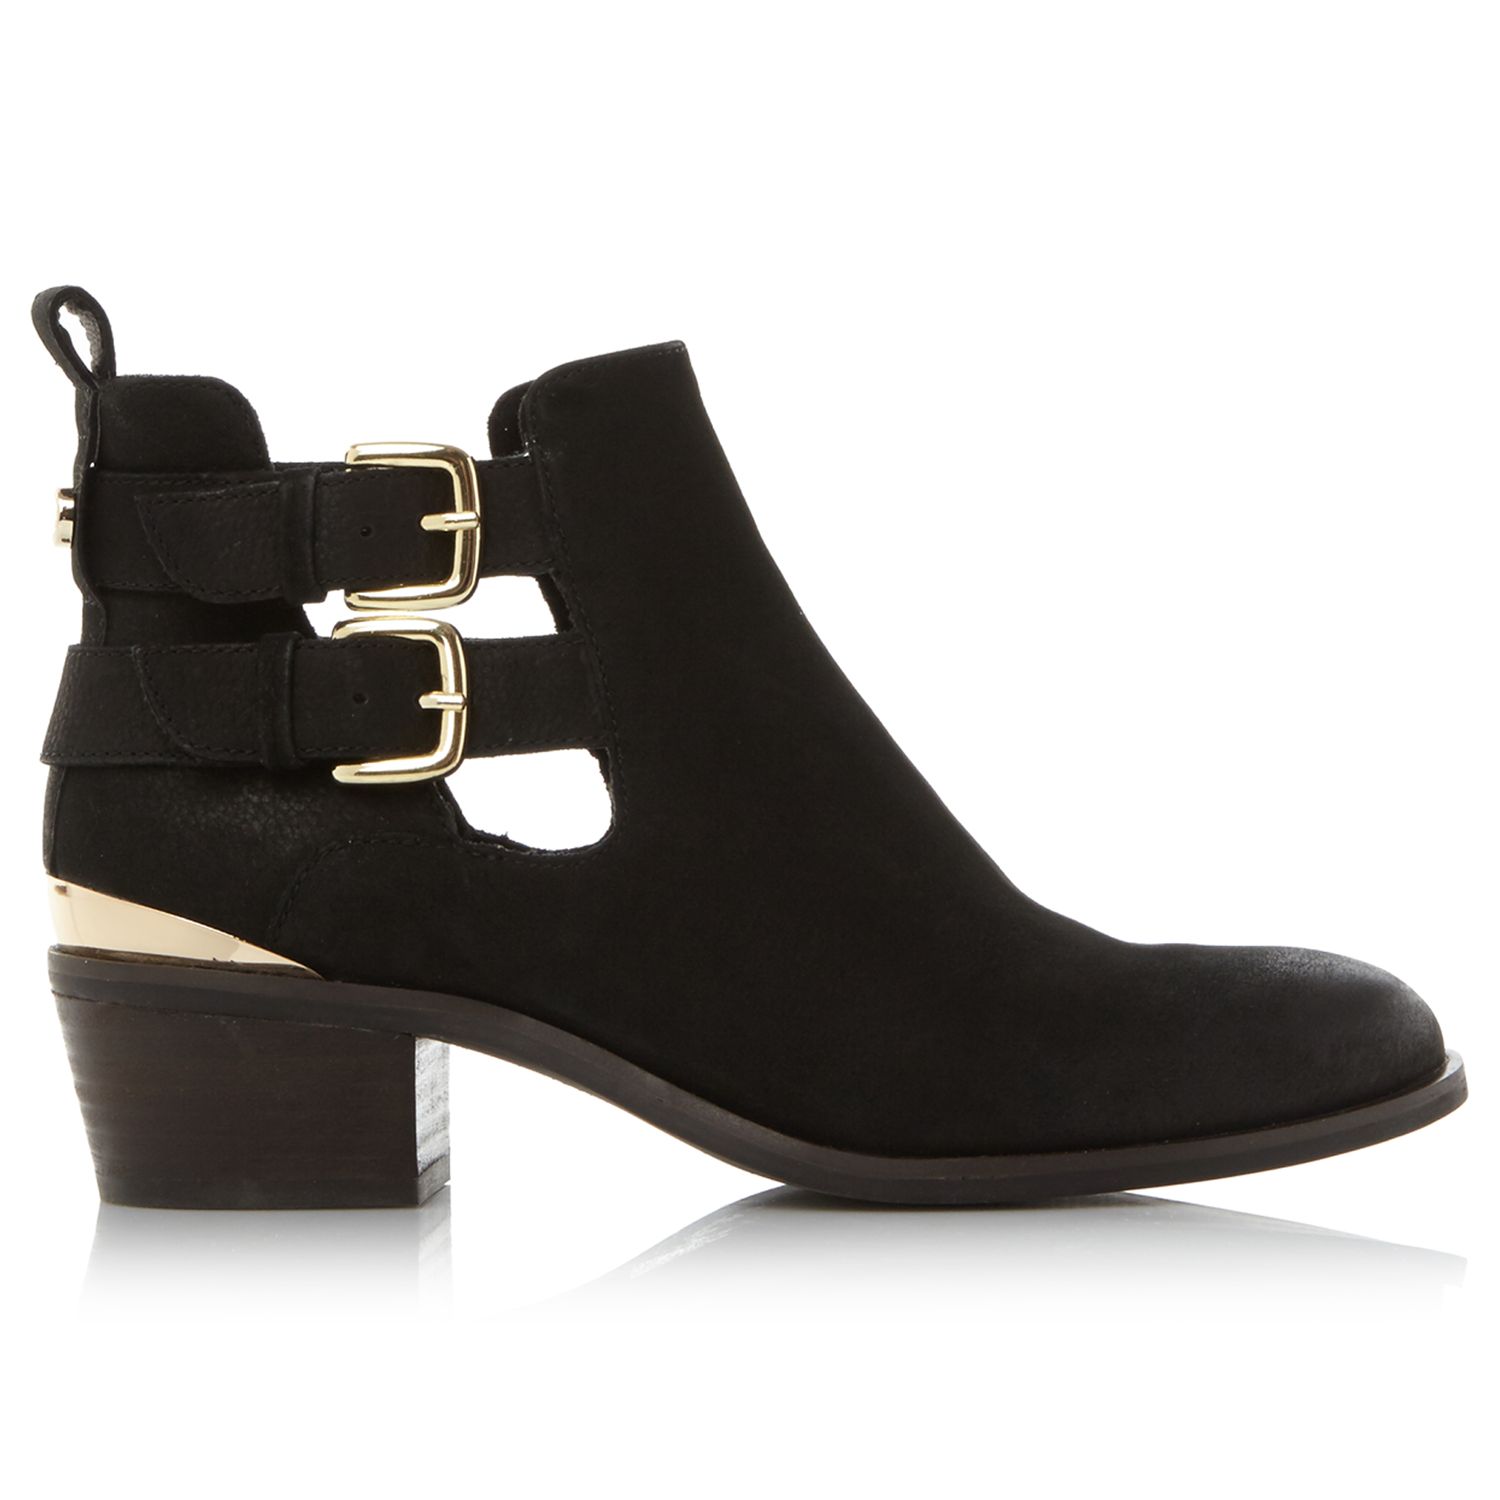 Steve Madden Picos Cut Out Ankle Boots, Black